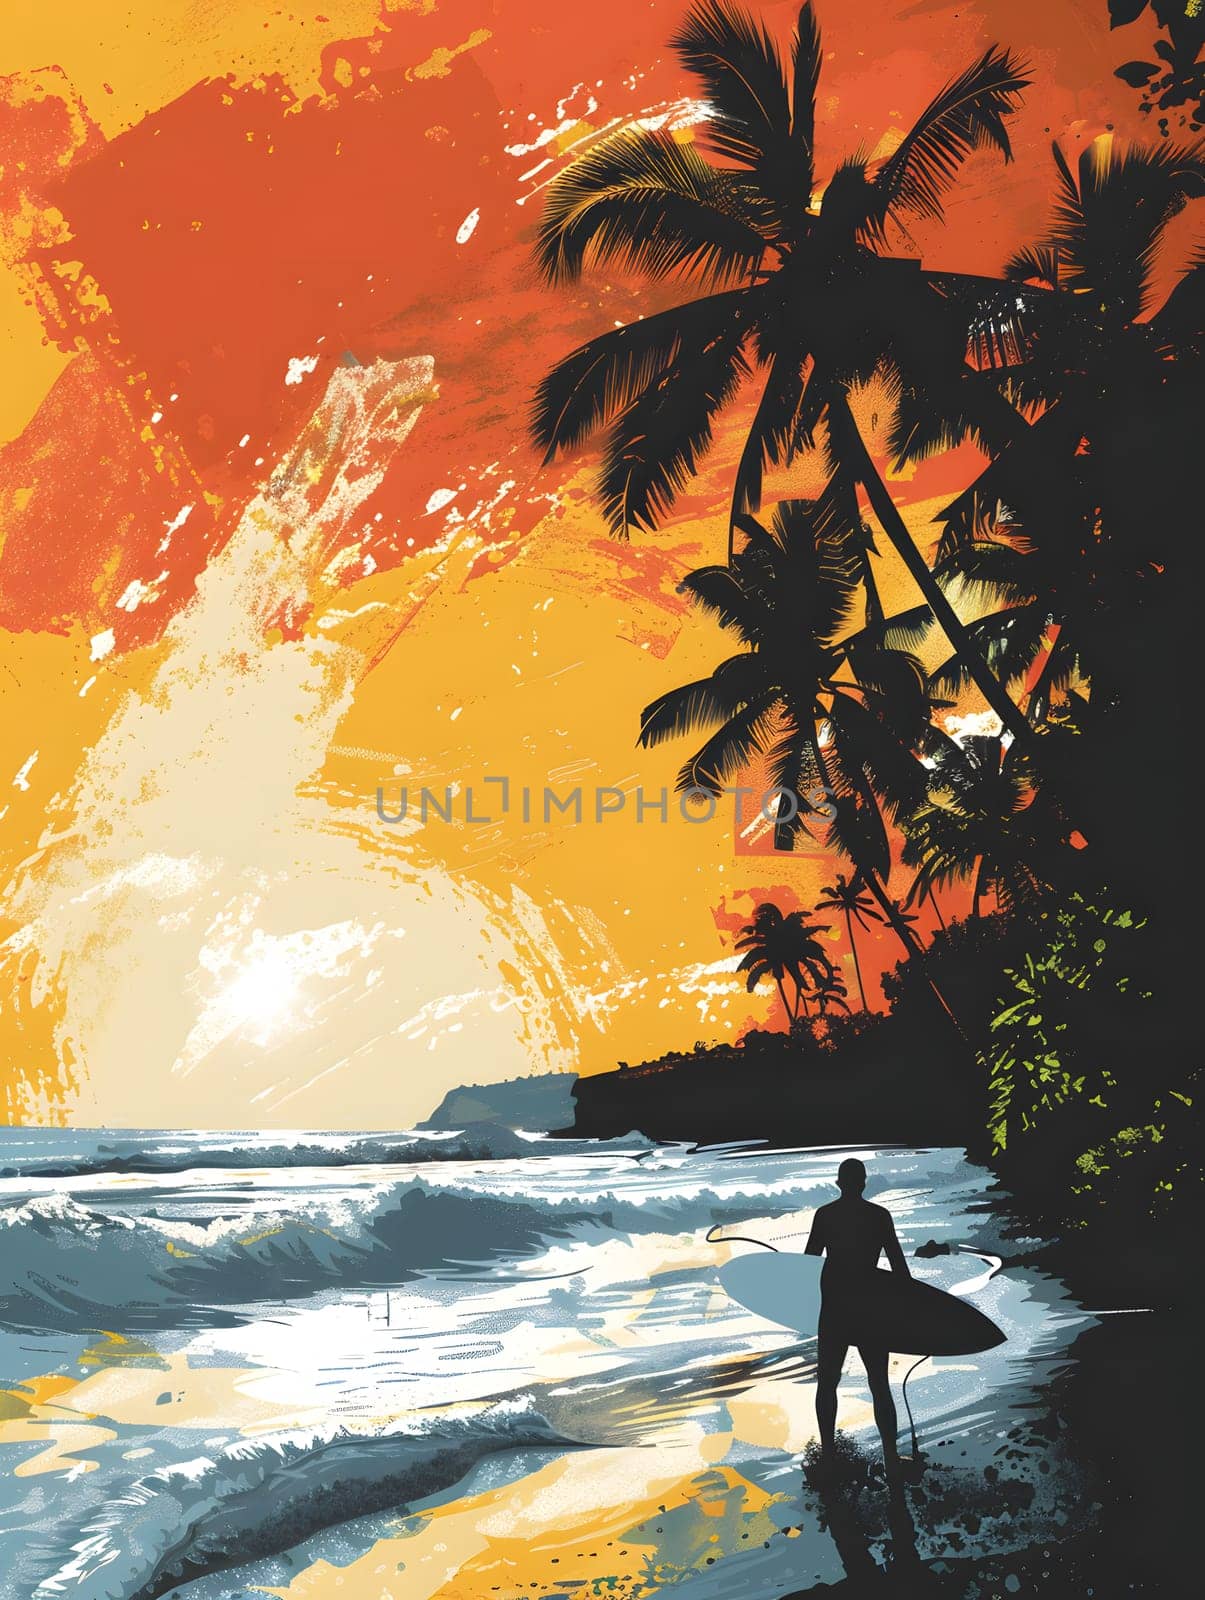 a painting of a surfer on the beach at sunset by Nadtochiy